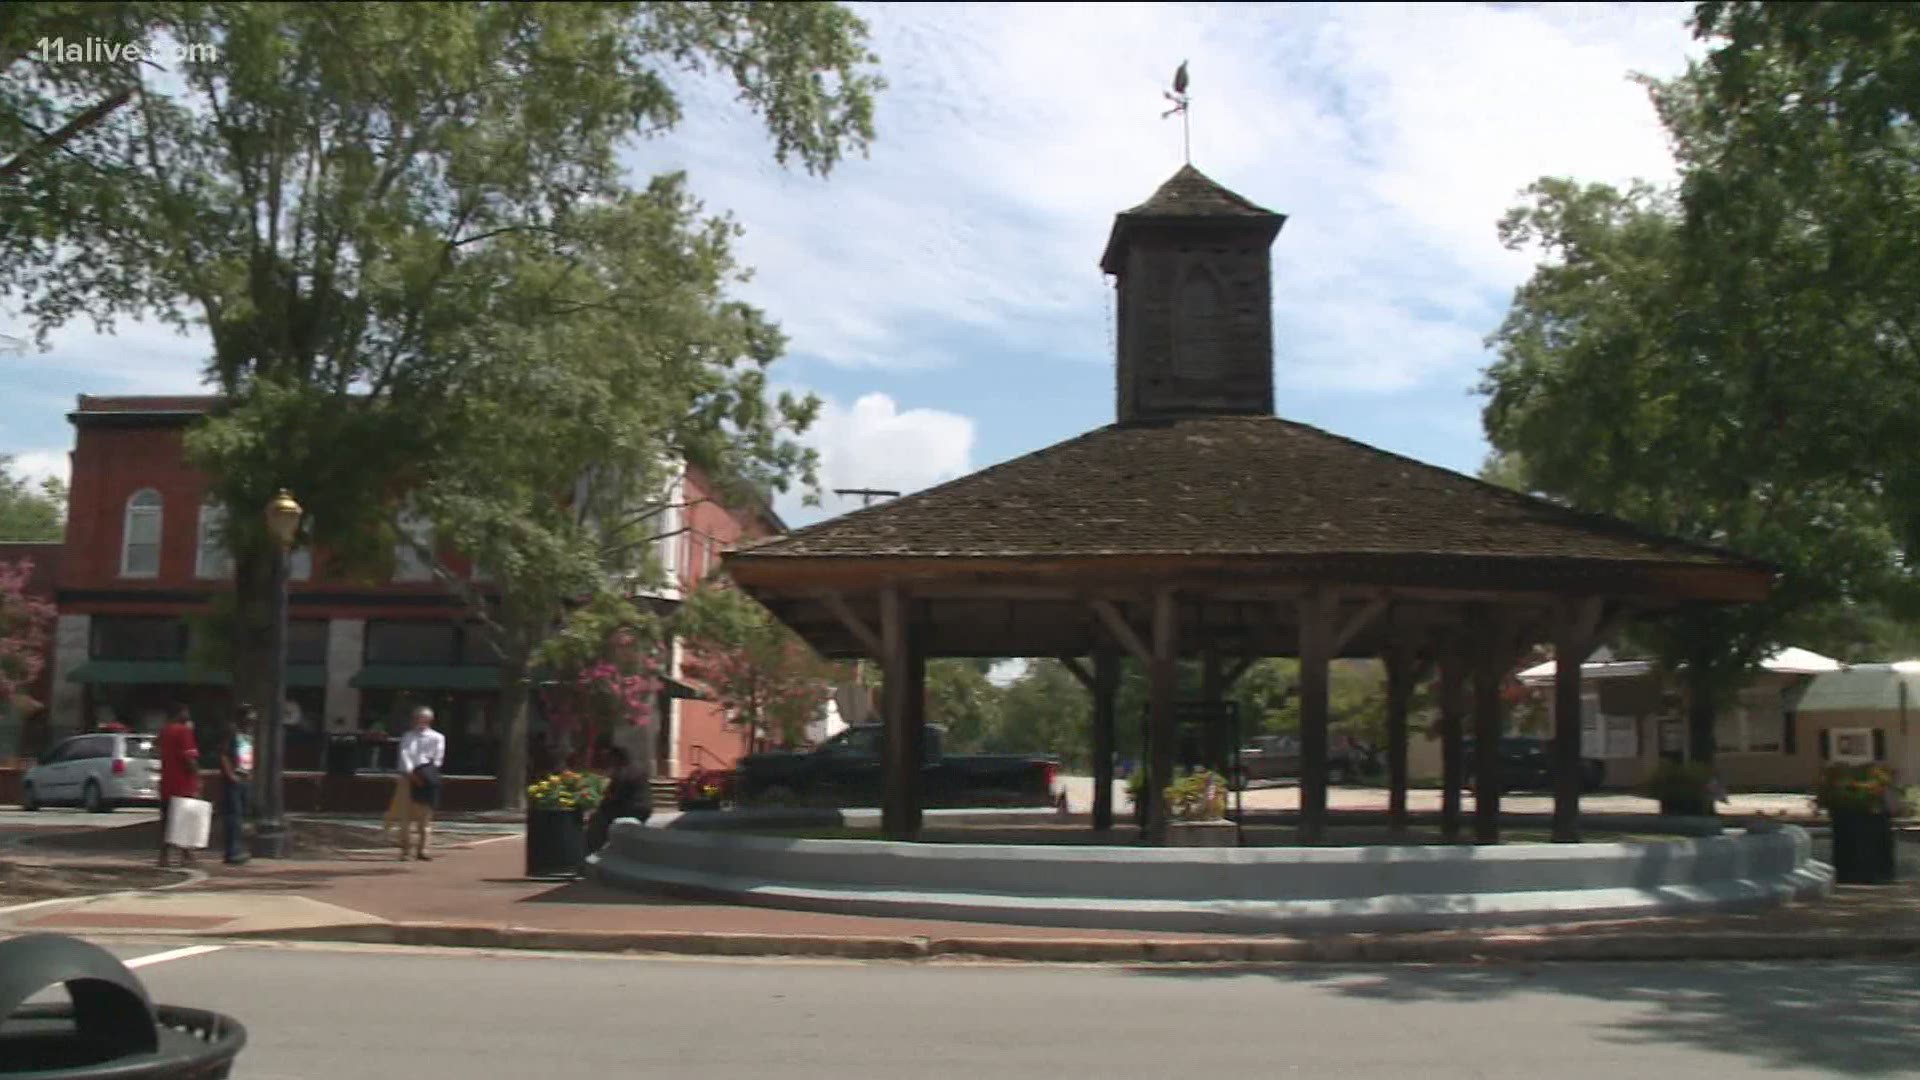 Louisville structure is state's last known slave market site